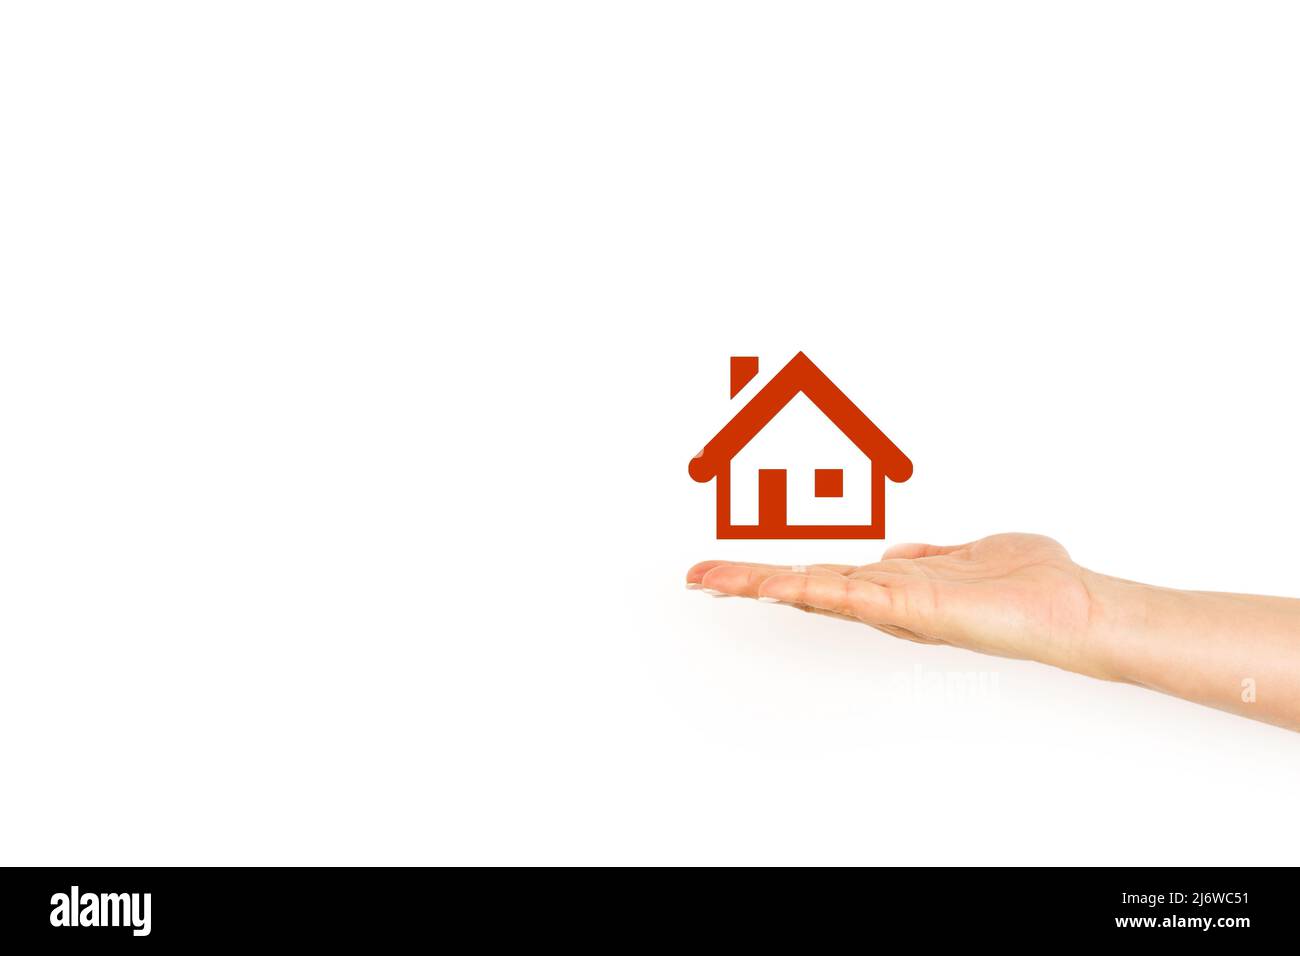 Woman hand showing house icon on a white background witth copy space Stock Photo